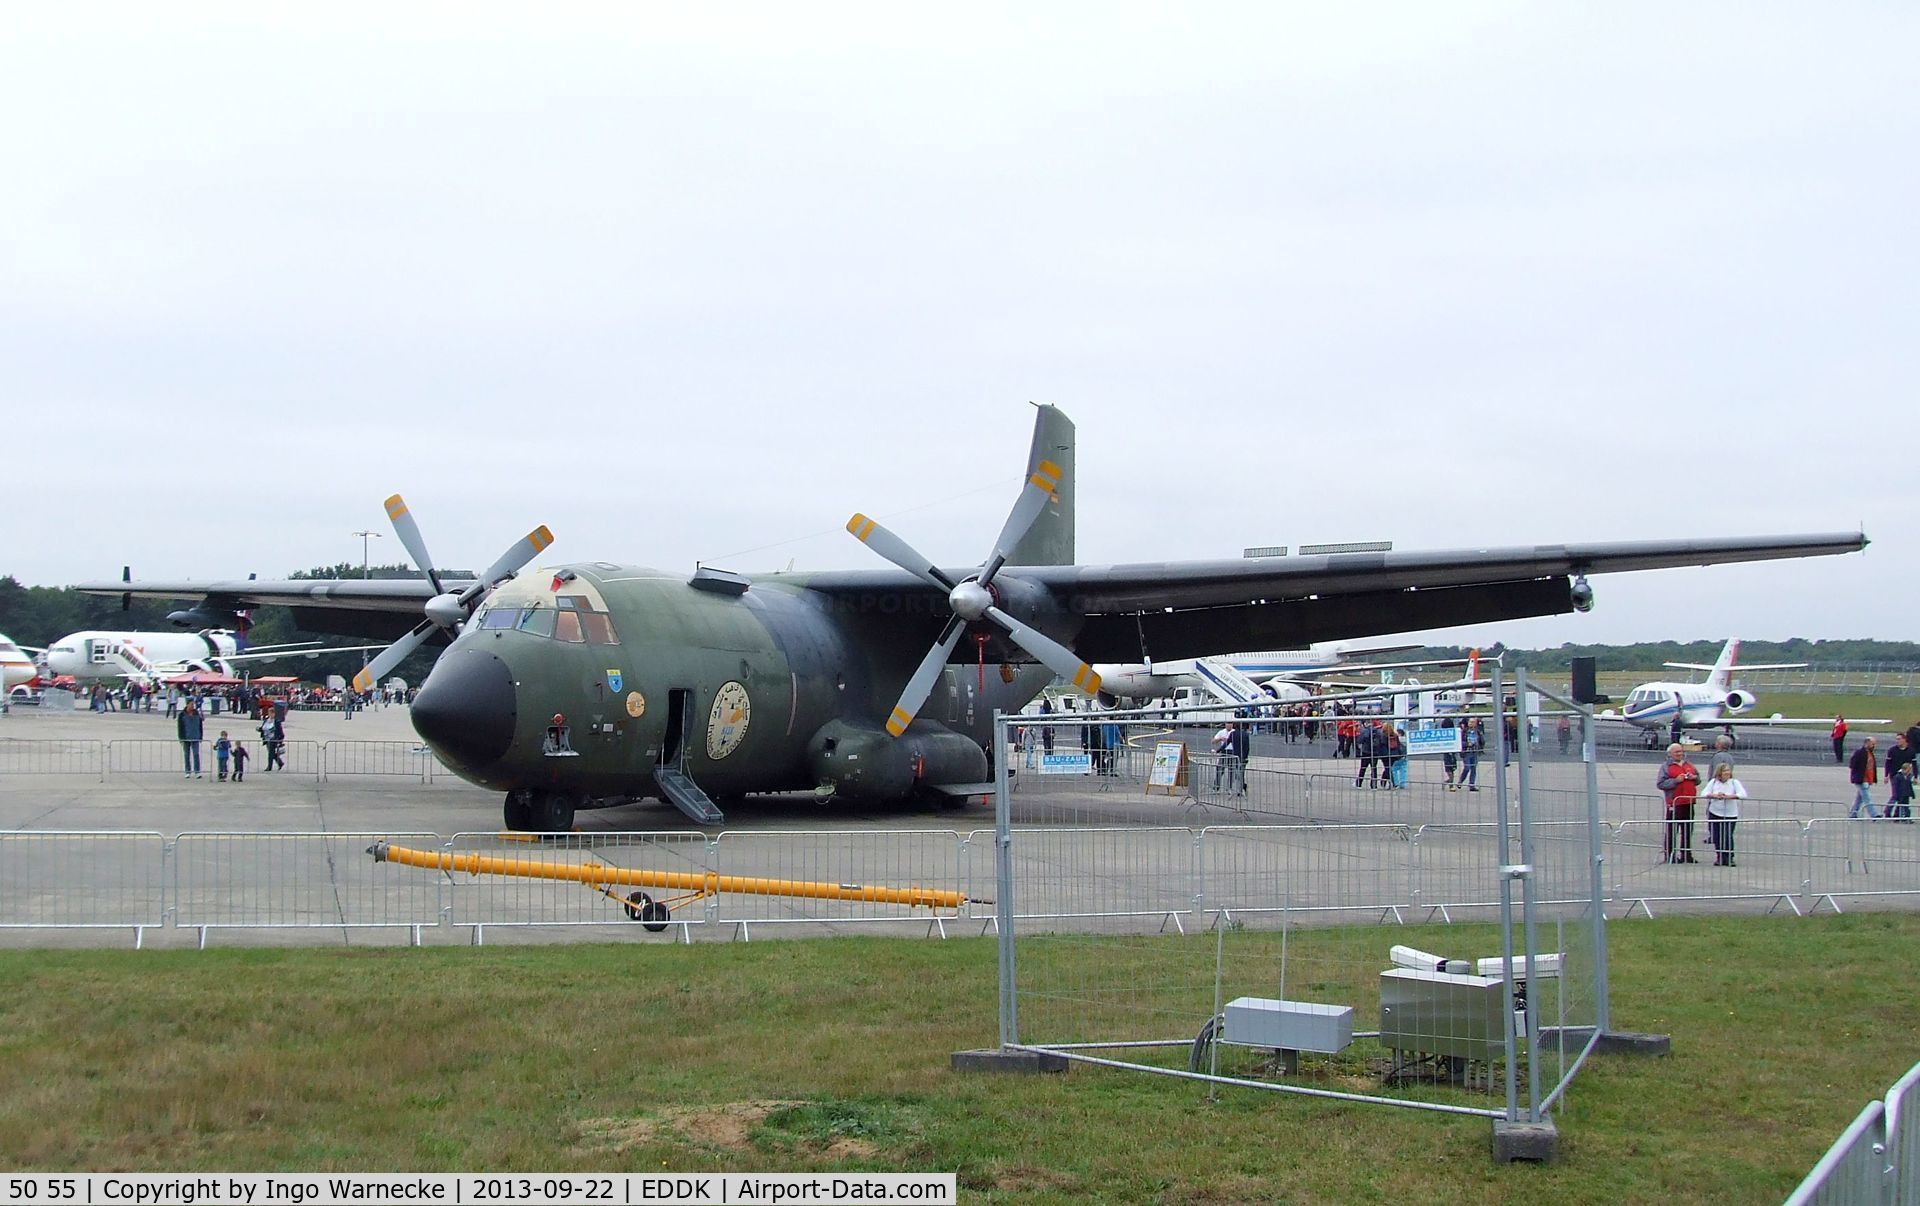 50 55, 1969 Transall C-160D C/N D77, Transall C-160D of the German Air Force (Luftwaffe) at the DLR 2013 air and space day on the side of Cologne airport